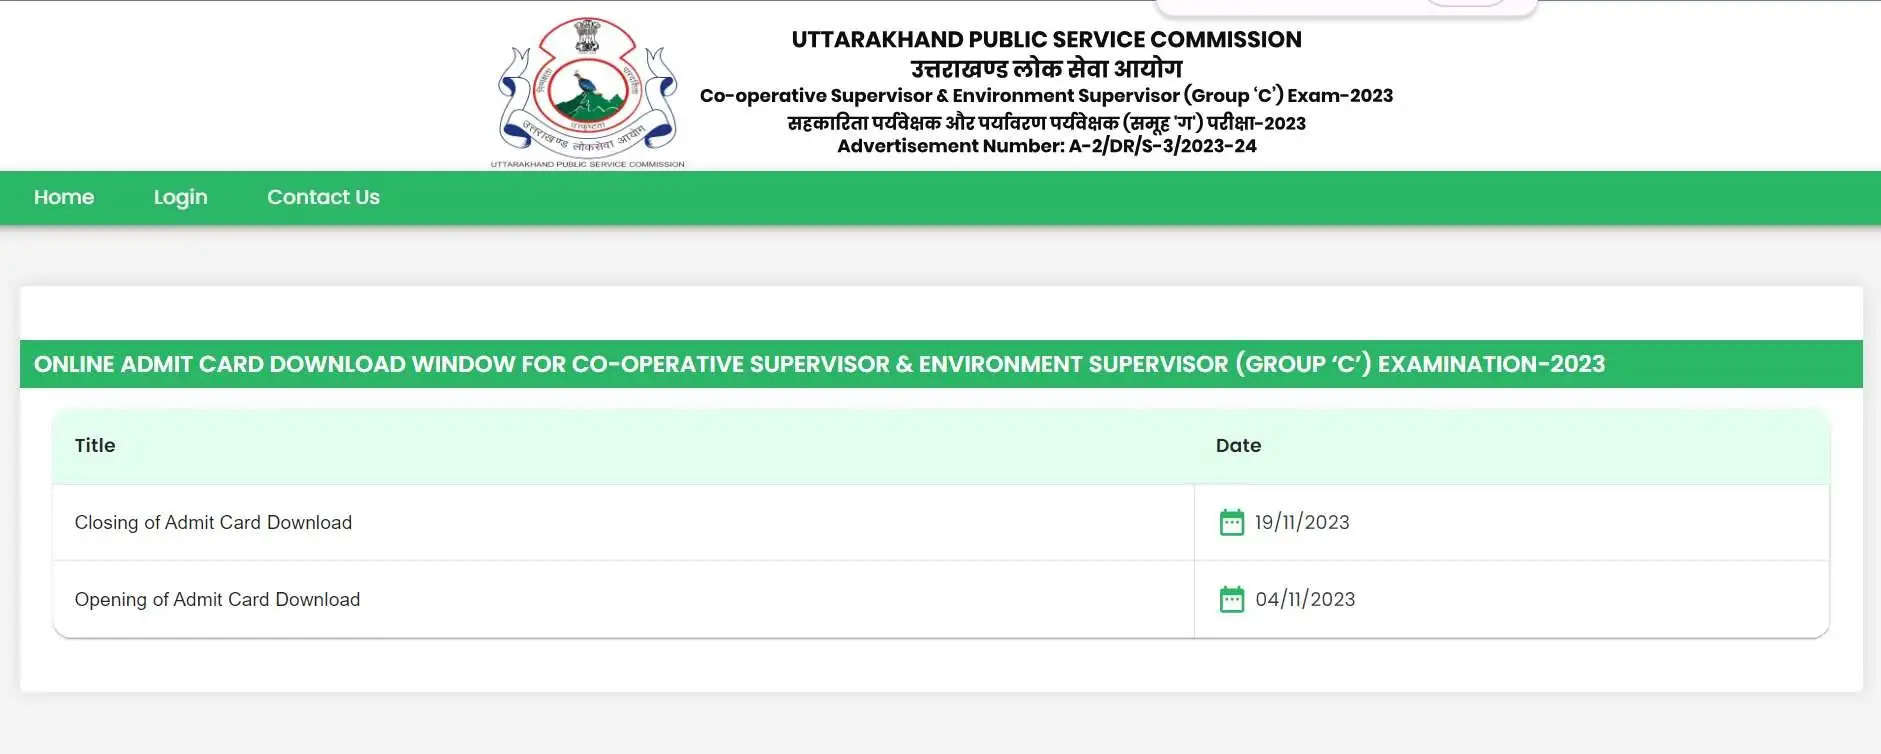 UKPSC Co-operative Supervisor & Environment Supervisor 2023 Admit Card Released: Here's How to Download